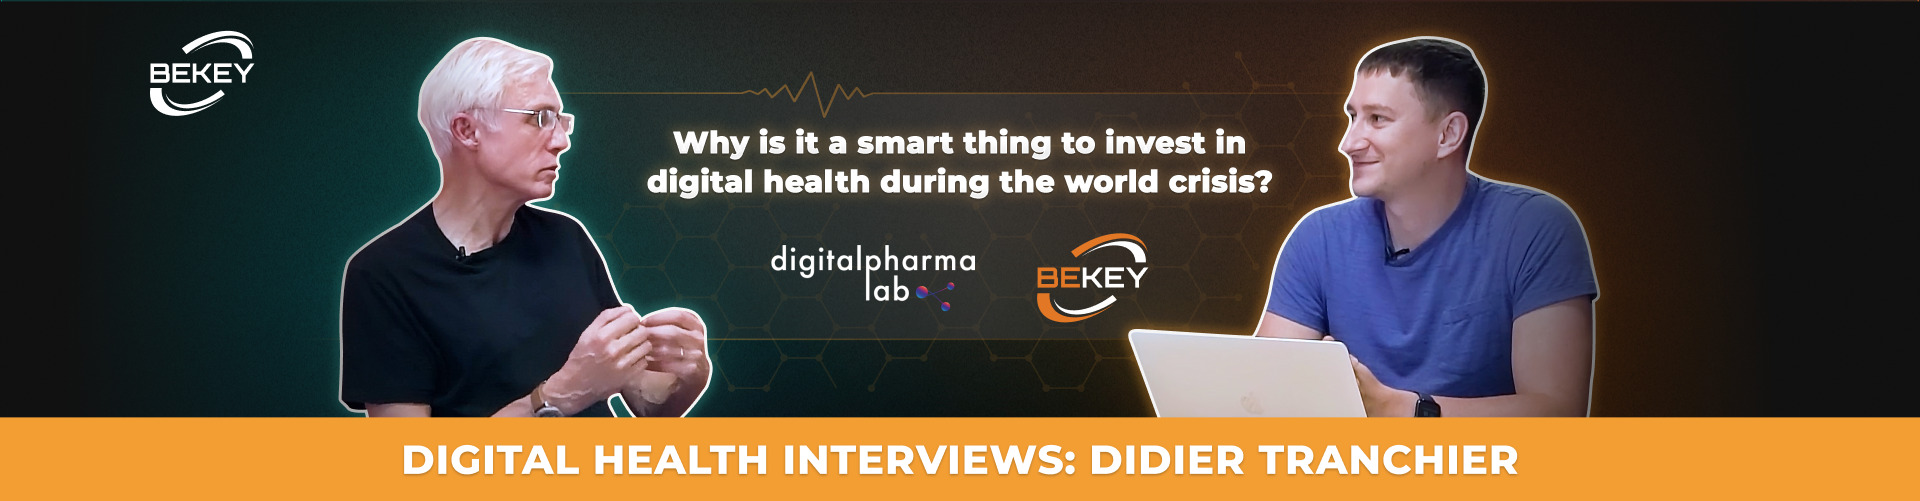 Why Is It a Smart Thing to Invest in Digital Health During the World Crisis? Digital Health Interviews: Didier Tranchier - image